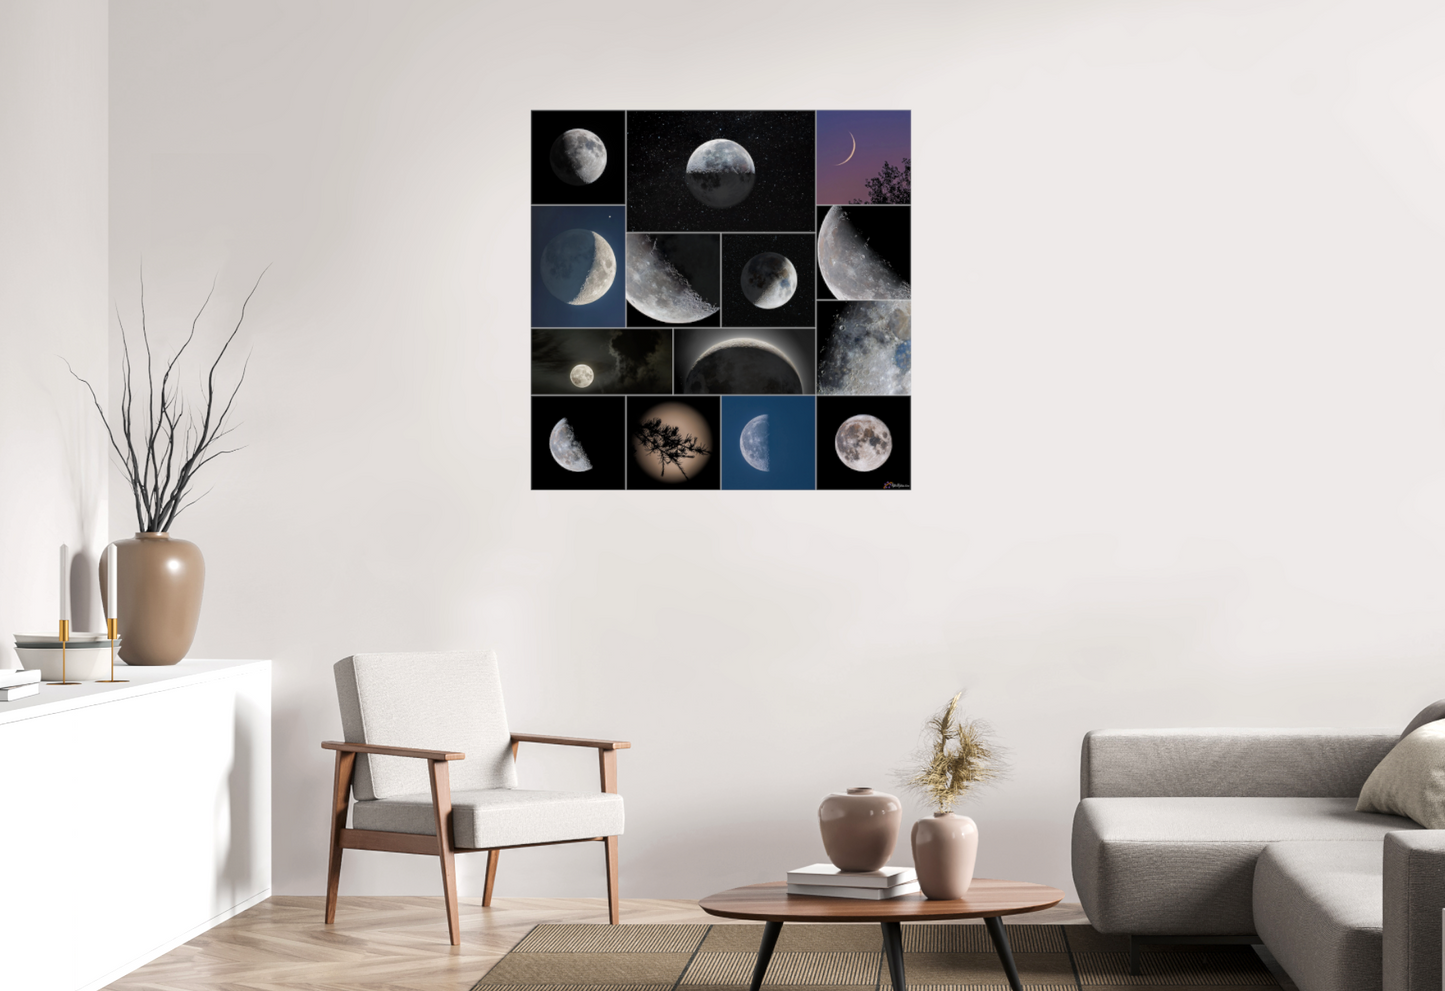 The moons on the wall